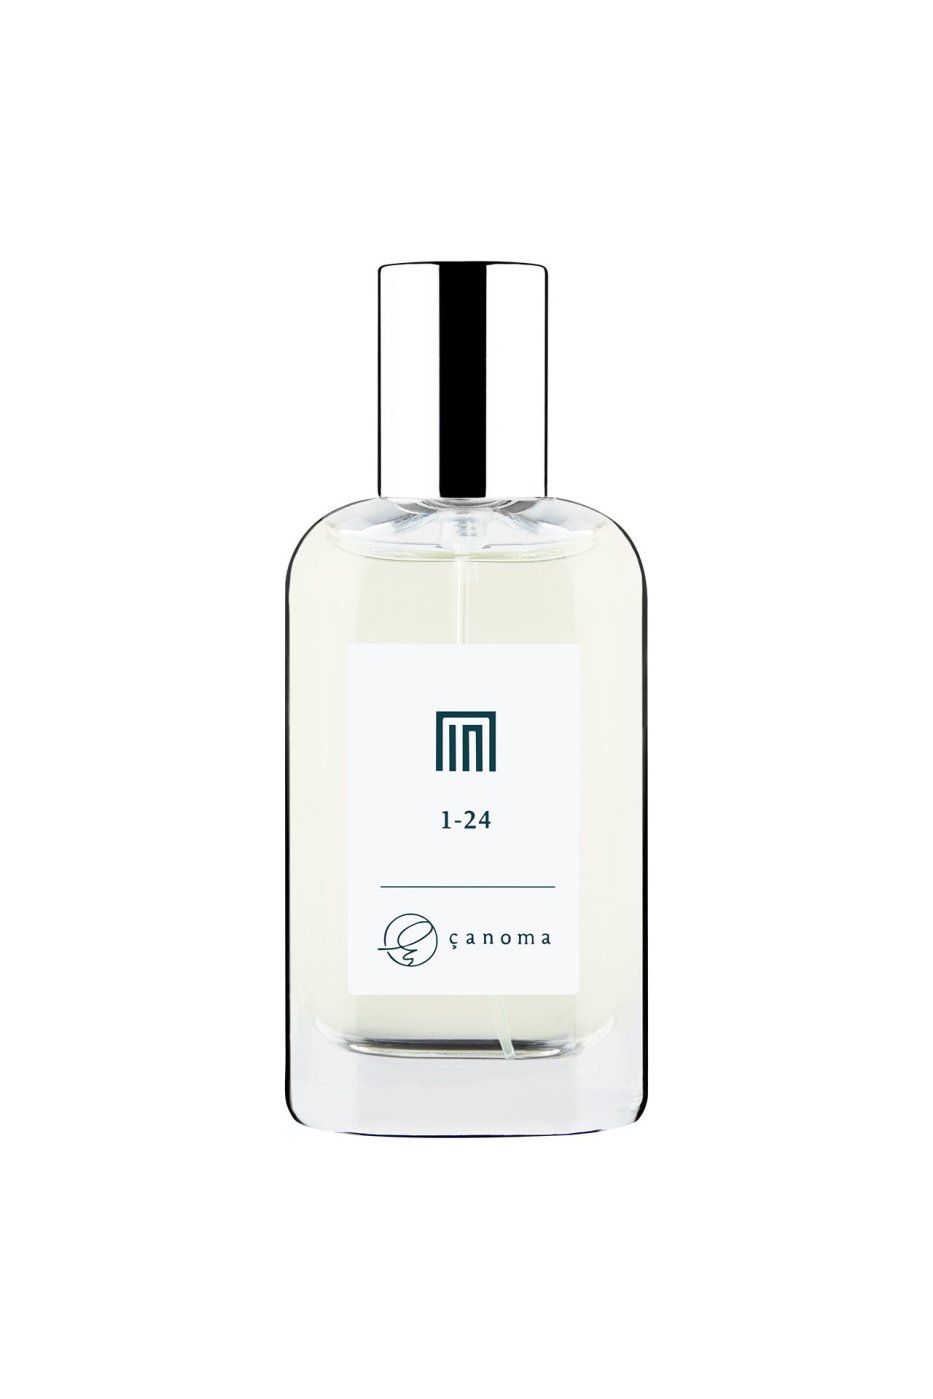 <img class='new_mark_img1' src='https://img.shop-pro.jp/img/new/icons8.gif' style='border:none;display:inline;margin:0px;padding:0px;width:auto;' />canoma サノマ-EAU DE TOILETTE-1-24-鈴虫